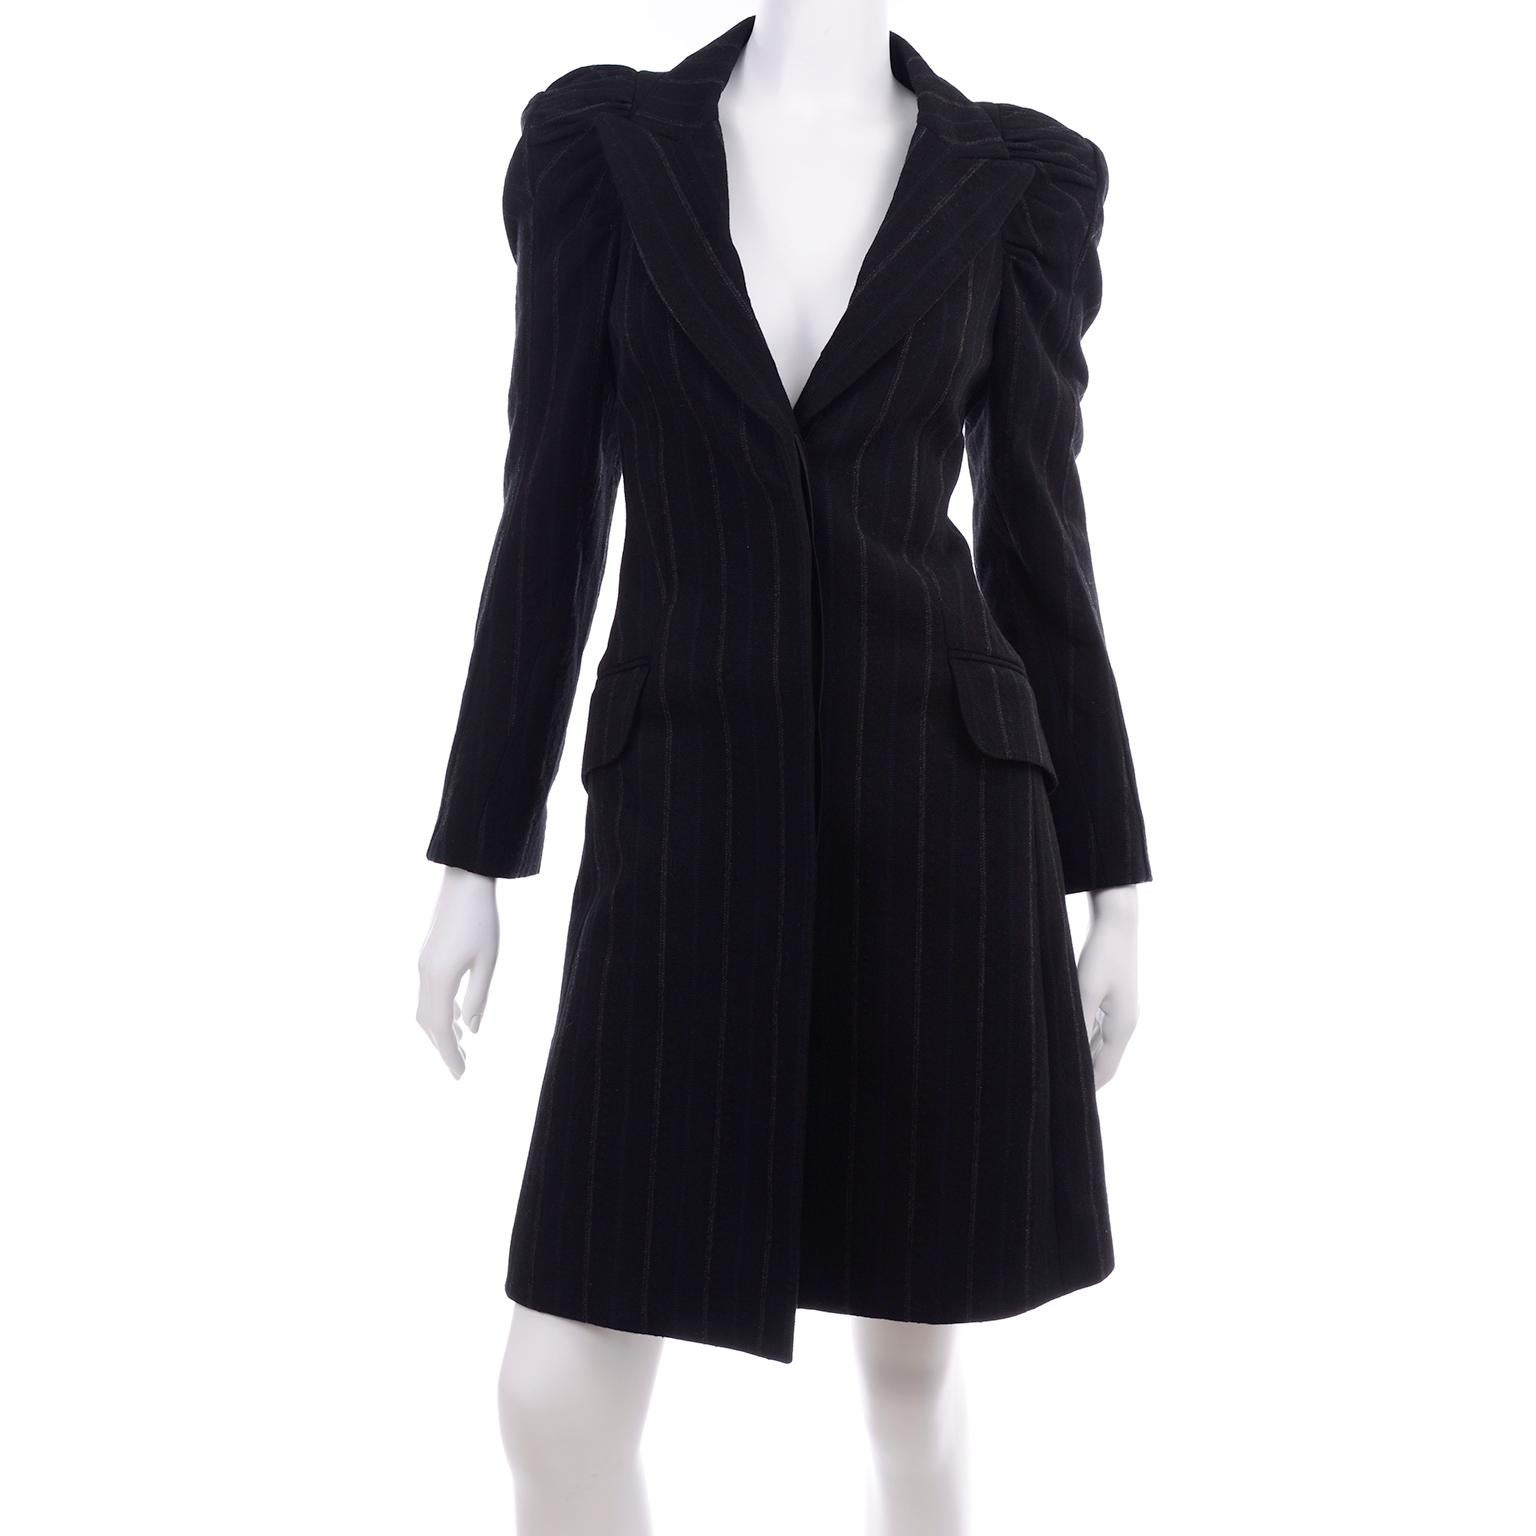 Black New w/Tags Marc Jacobs Louis Vuitton 2010 Pinstripe Coat W Gathered Puff Sleeves